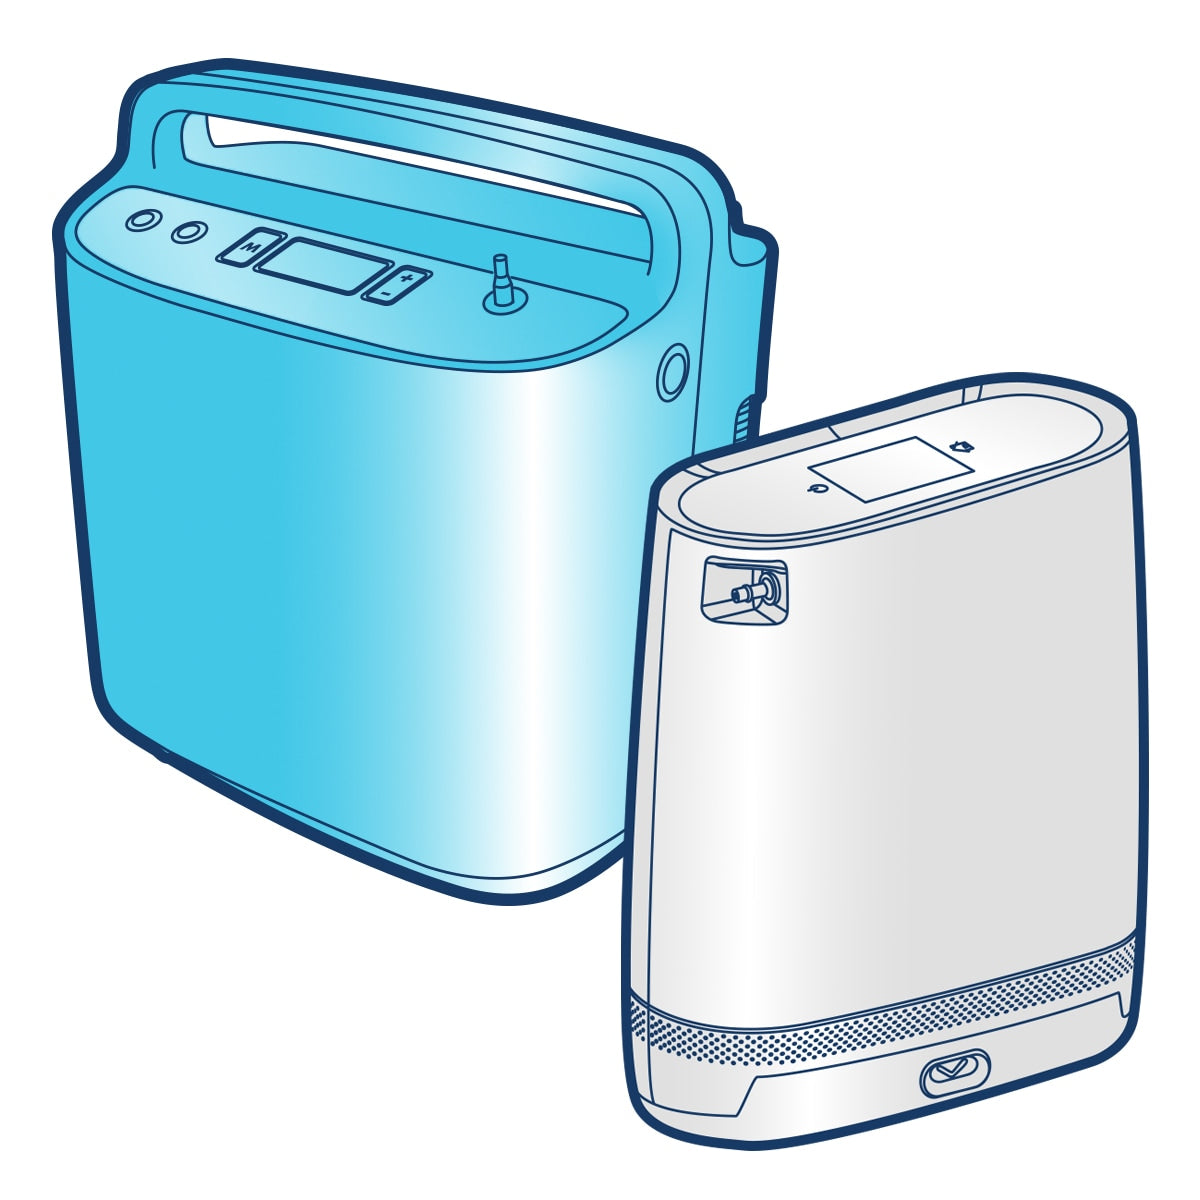 Certified Pre-Owned Portable Oxygen Concentrators